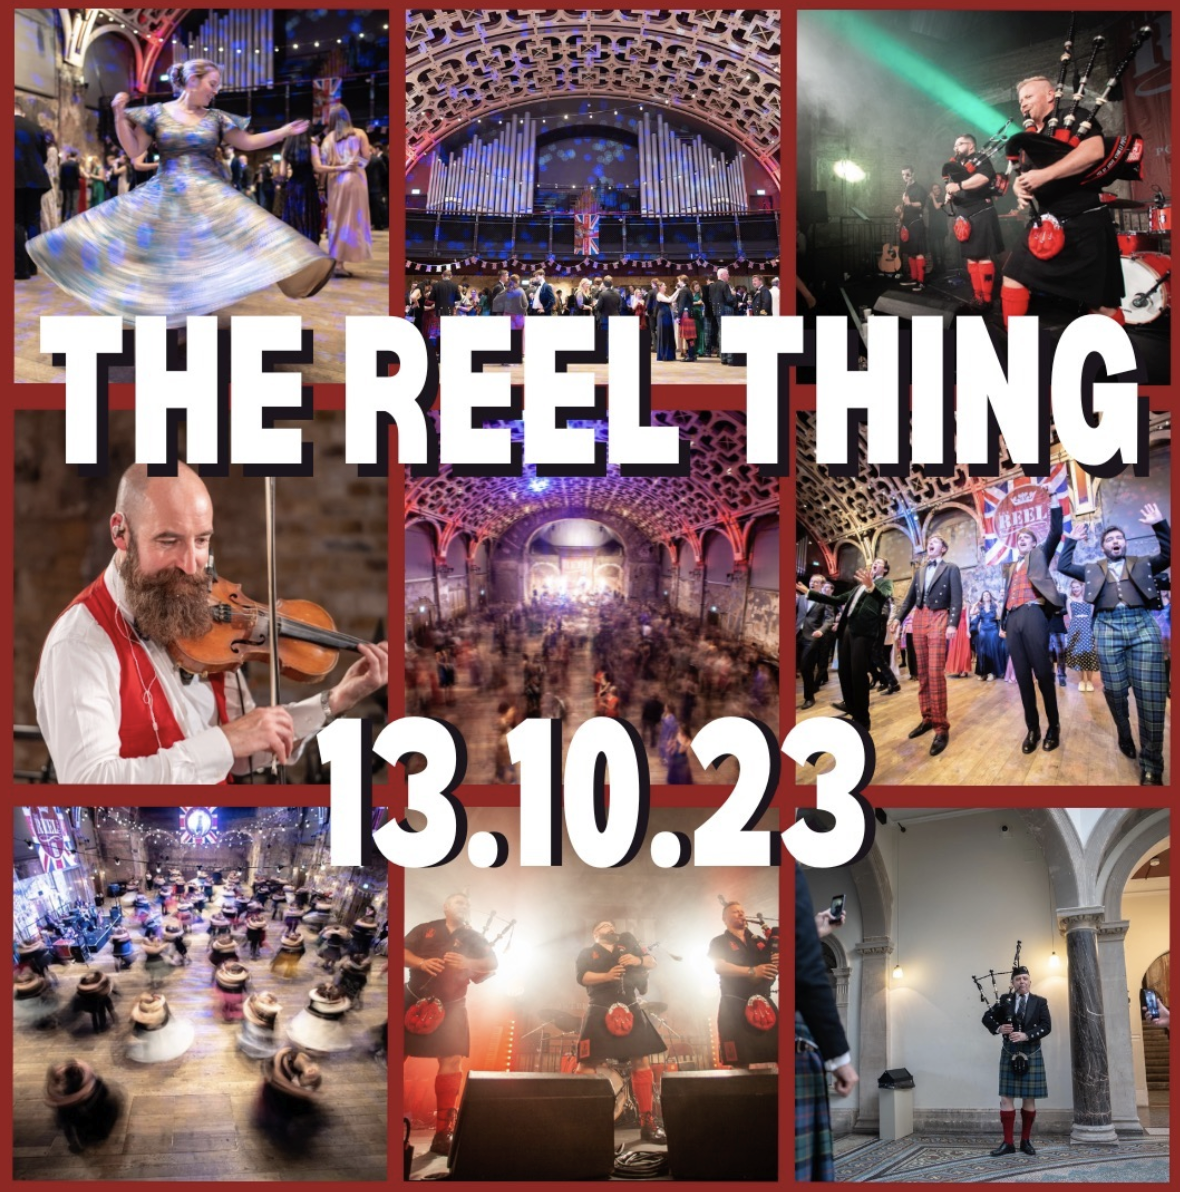 EVENTS — Reel Thing Balls & Events